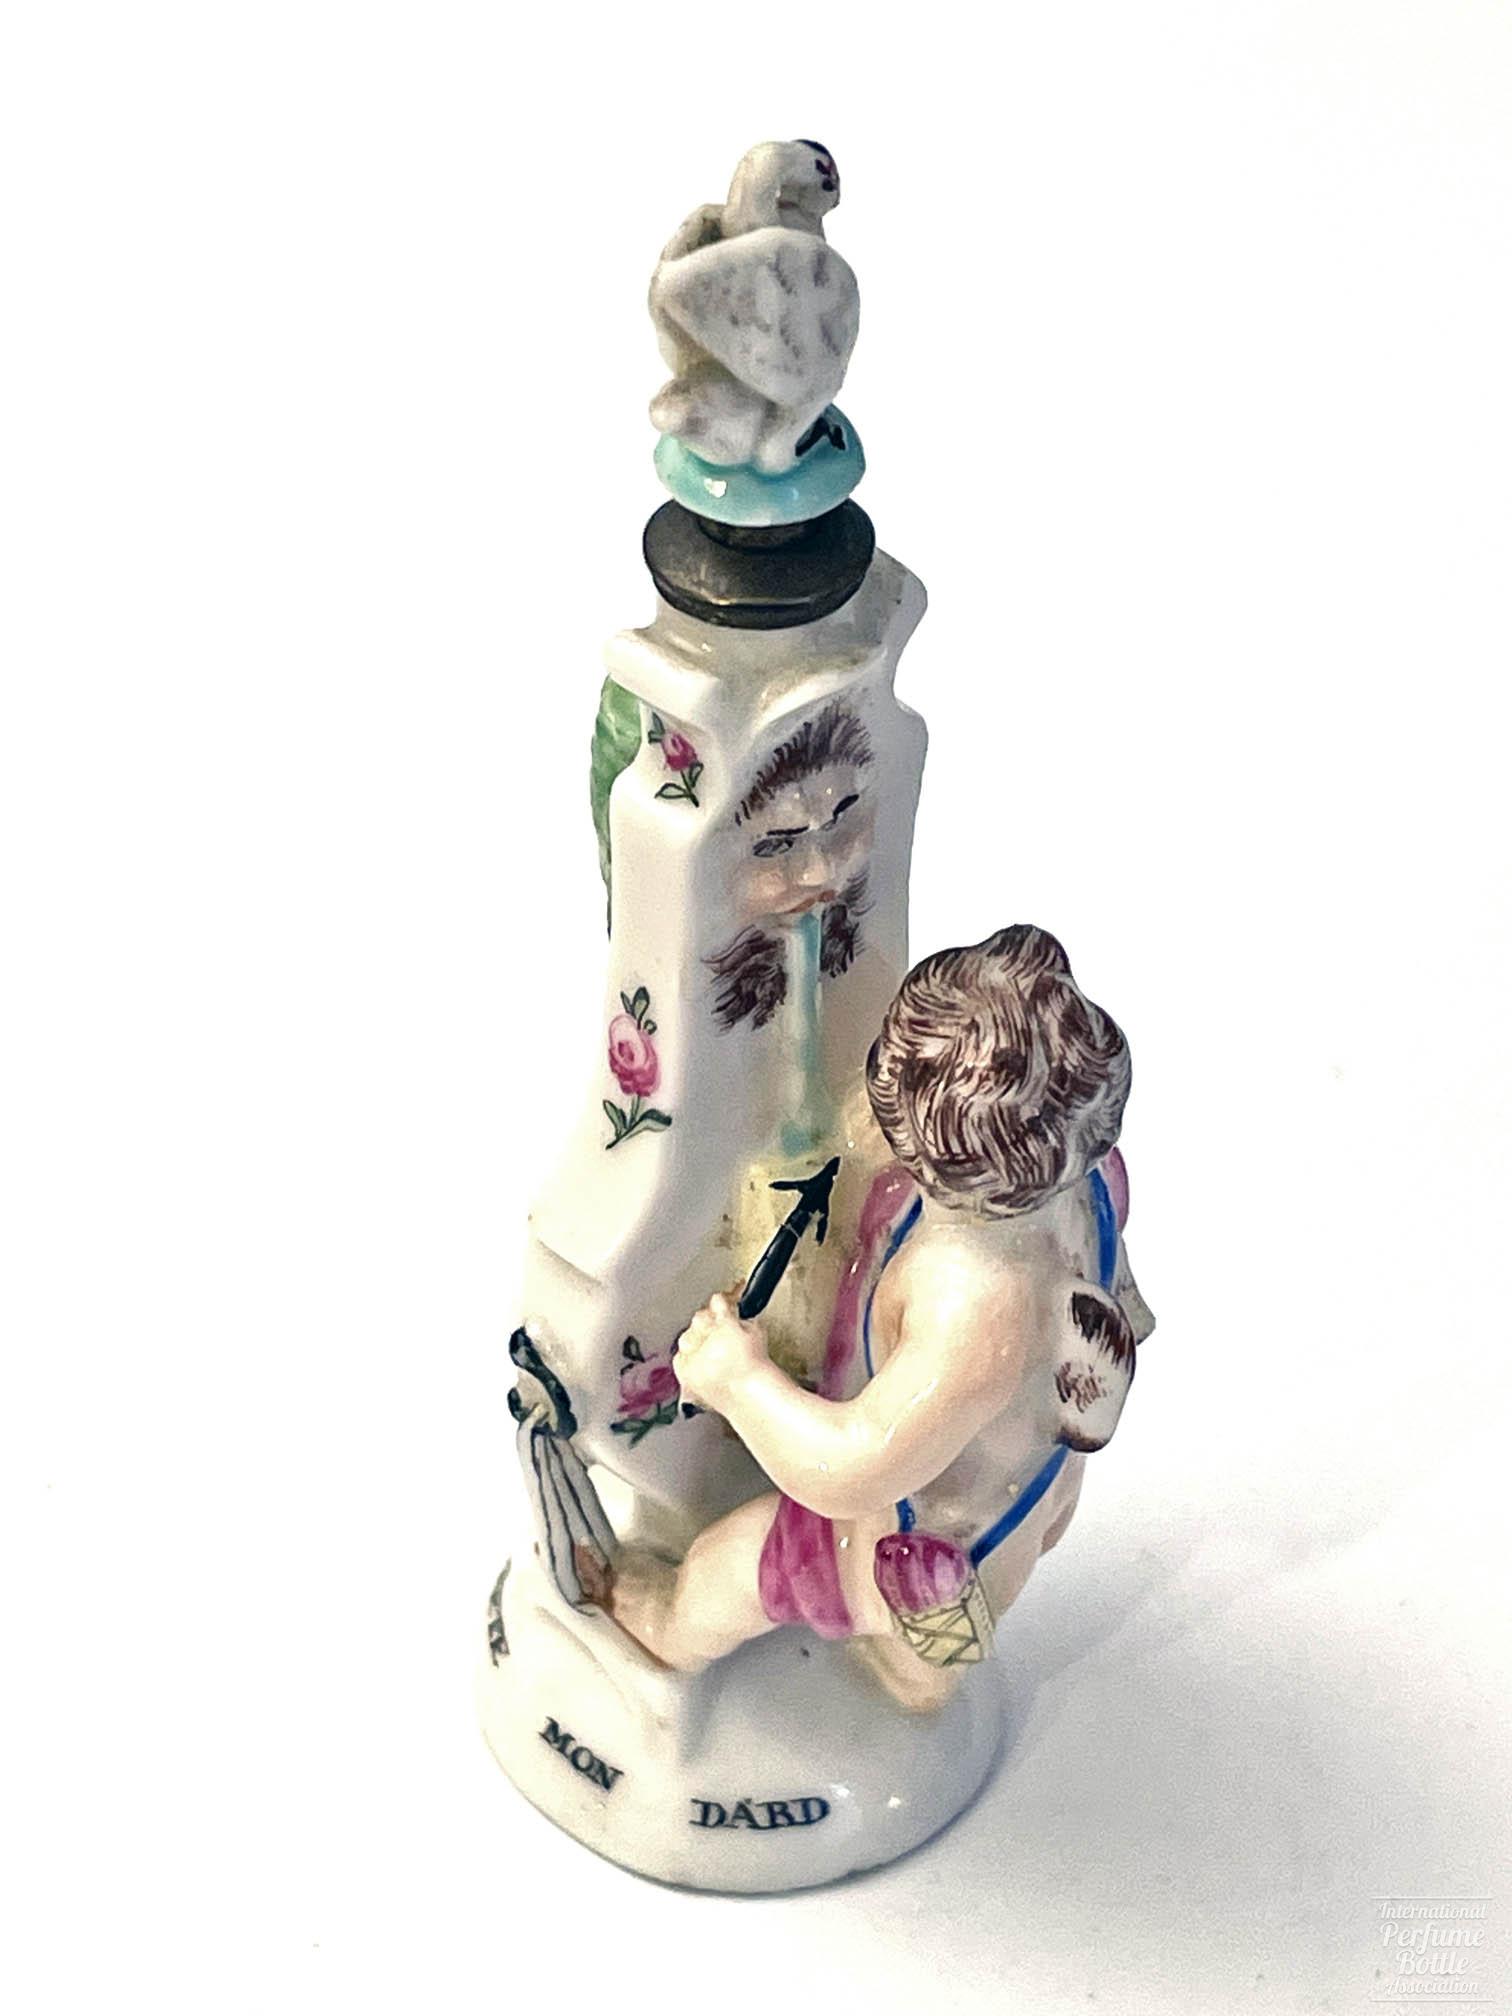 Cupid at His Grinder,  Attributed to St. James Porcelain, 18th Century